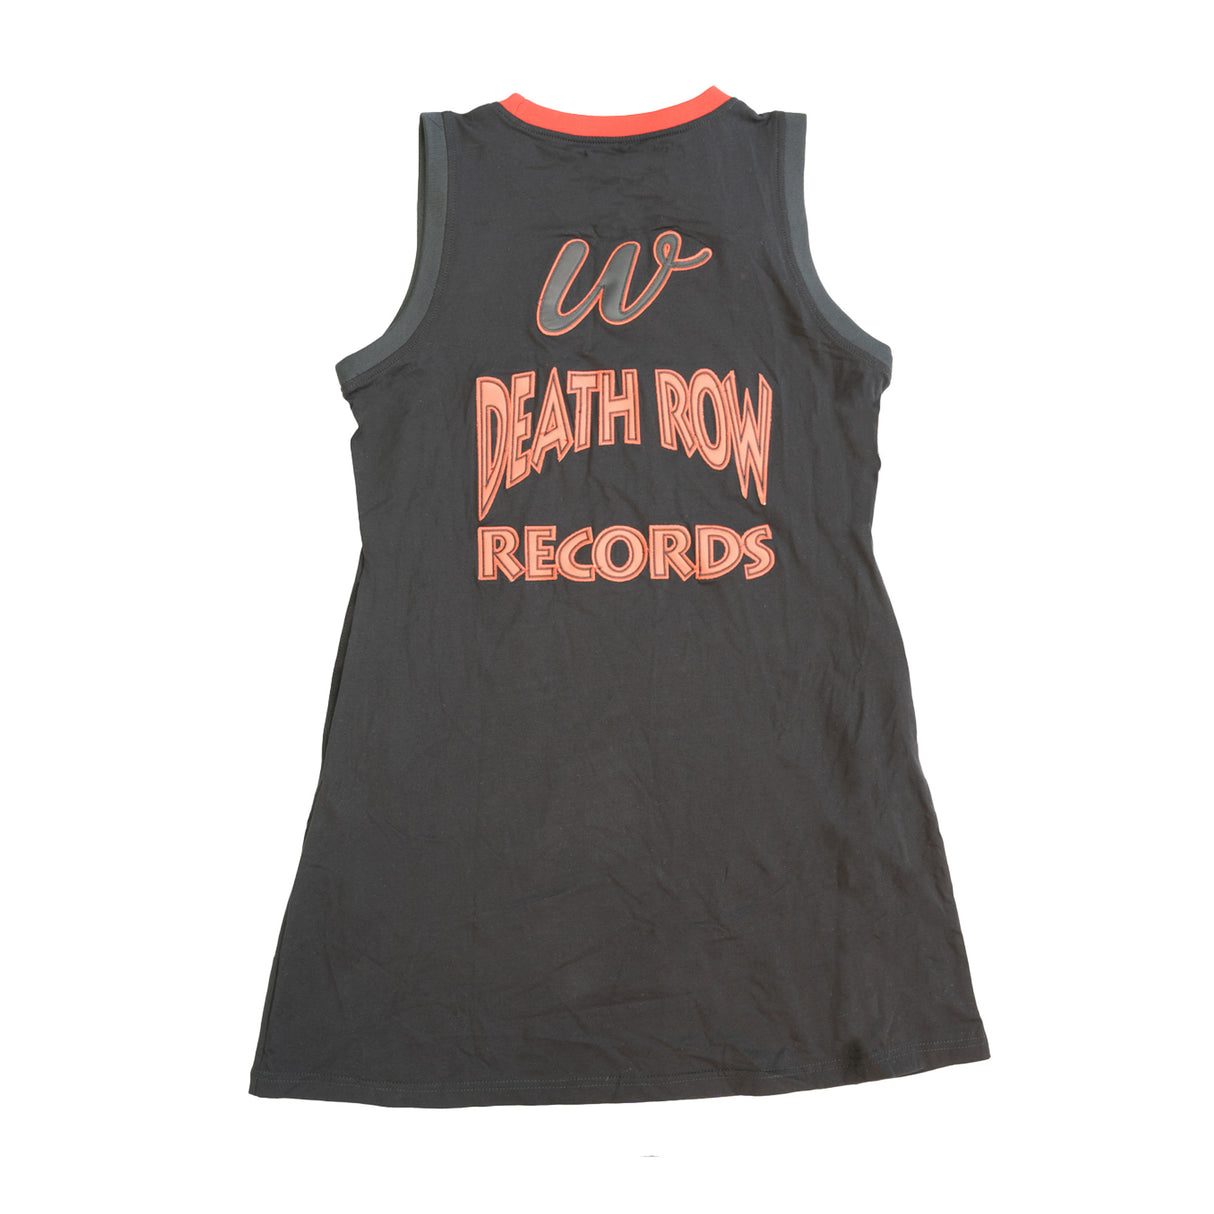 DEATH ROW RECORDS JERSEY DRESS (BLACK/RED)